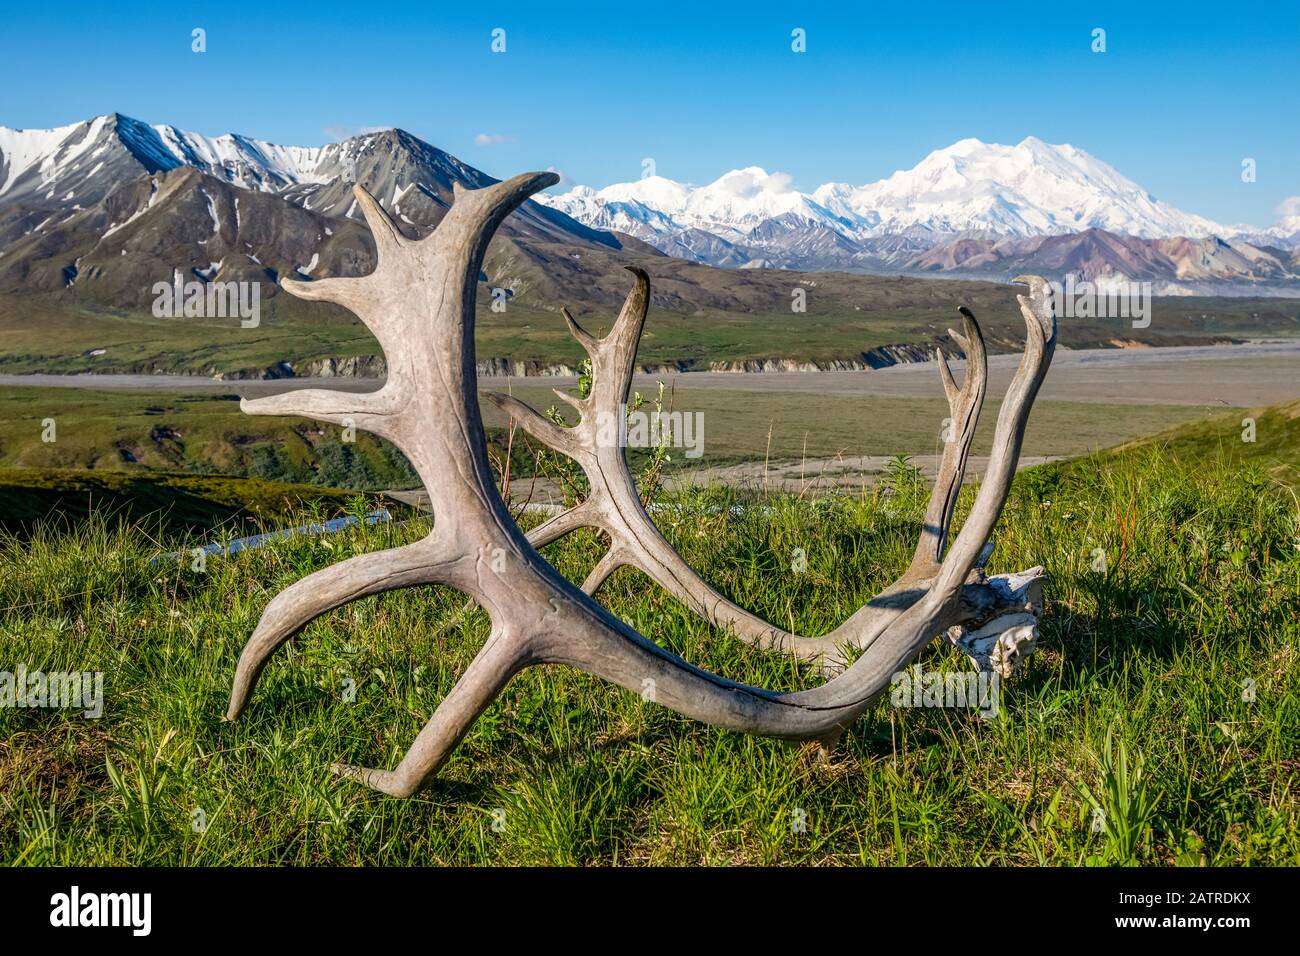 Caribou antlers sit on the grass in the foreground with a view of Denali and the Eielson Visitor Center, Denali National Park and Preserve, Interio... Stock Photo